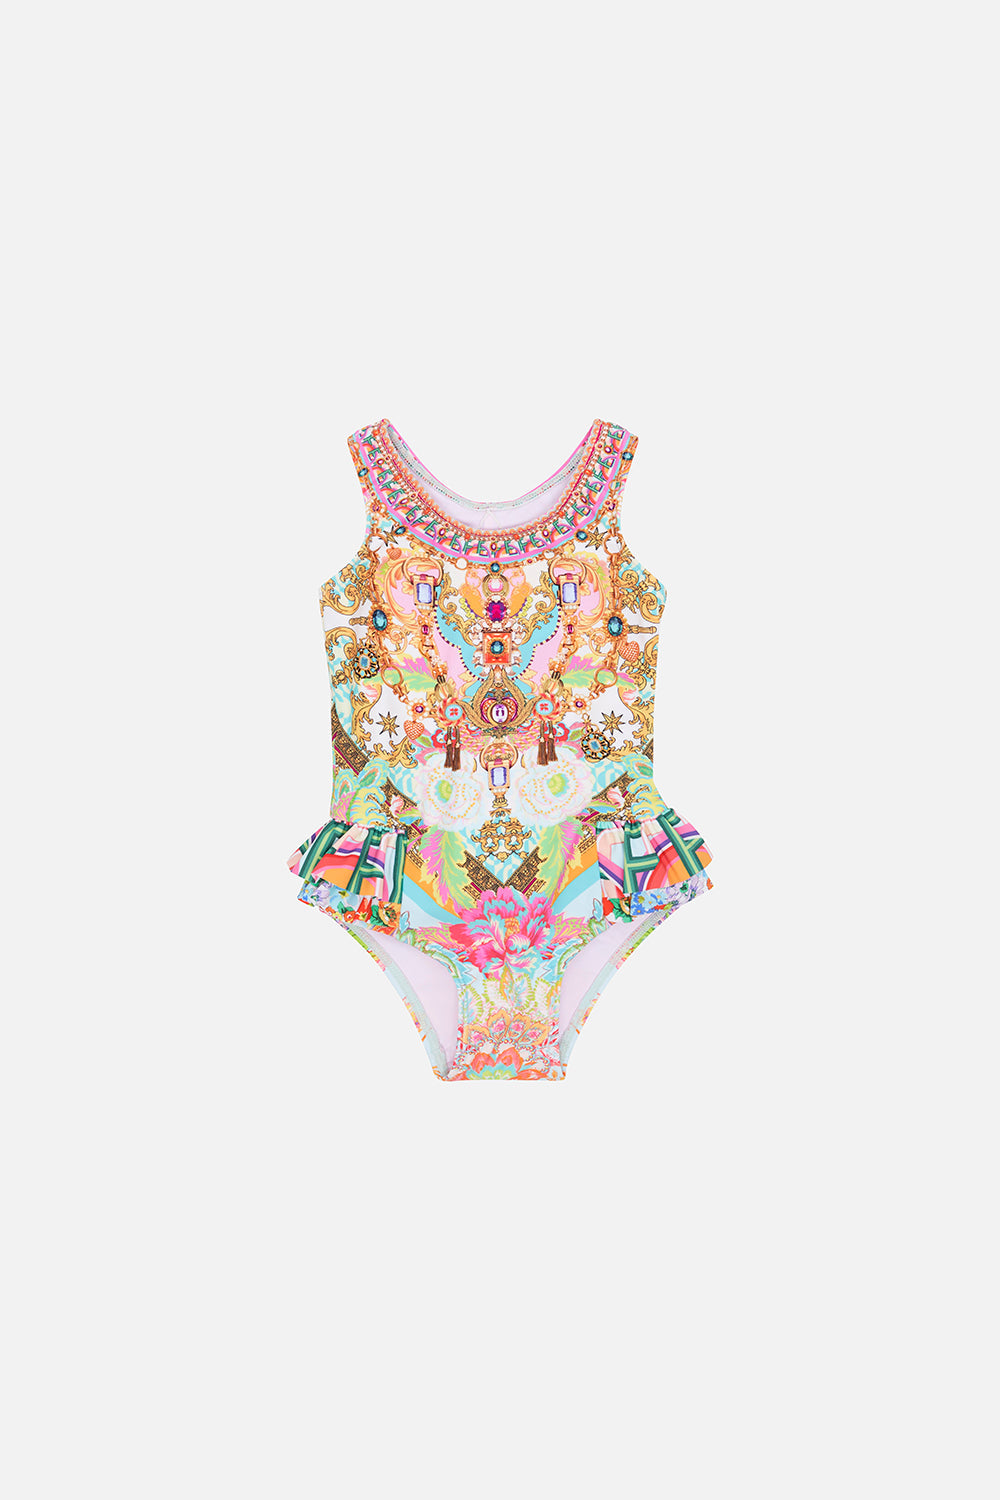 Product view of MILLA BY CAMILLA babies one piece in An Italian Welcome print